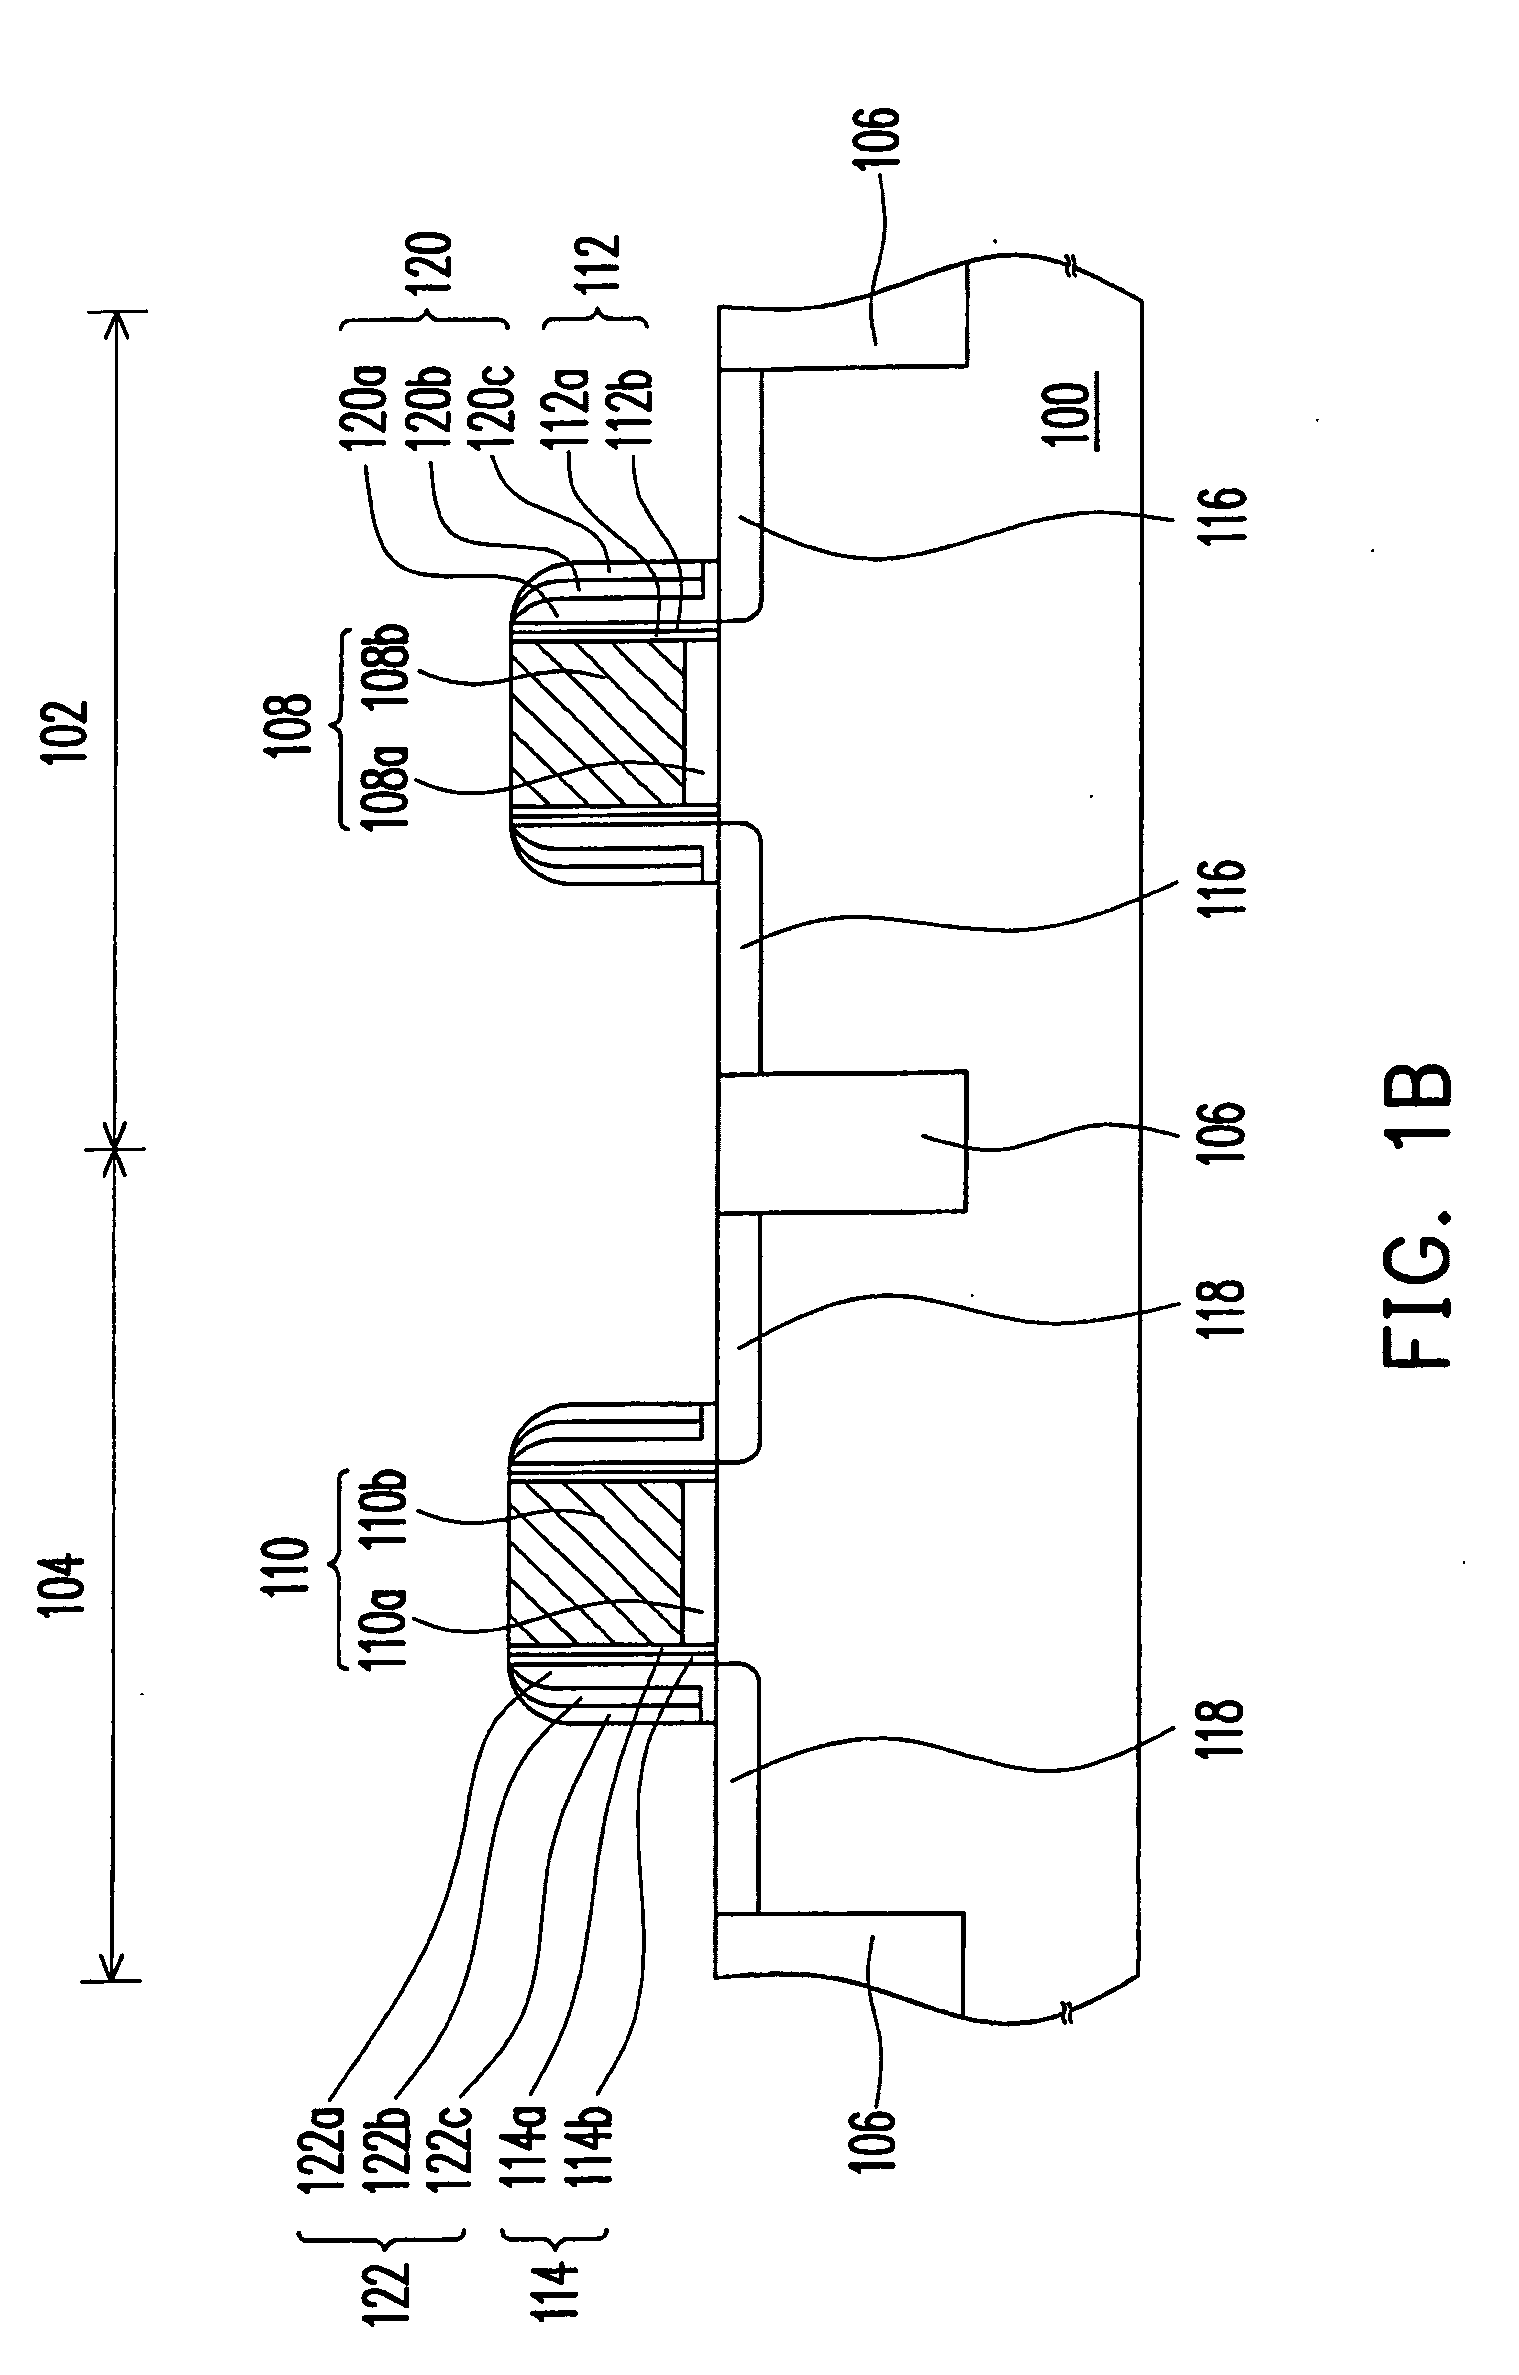 Complementary metal-oxide-semiconductor device